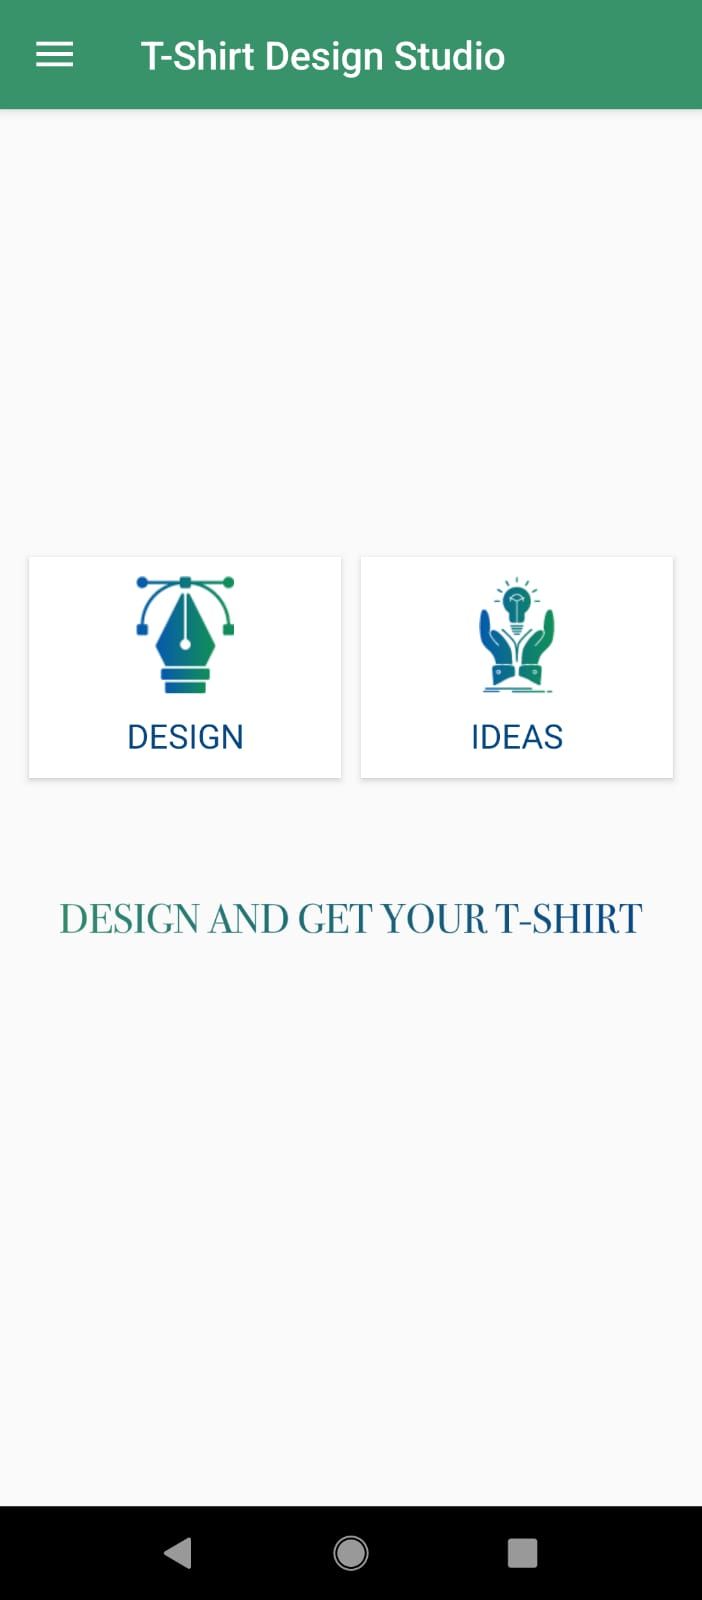 T-Shirt Design Studio - Home Page With Two Options